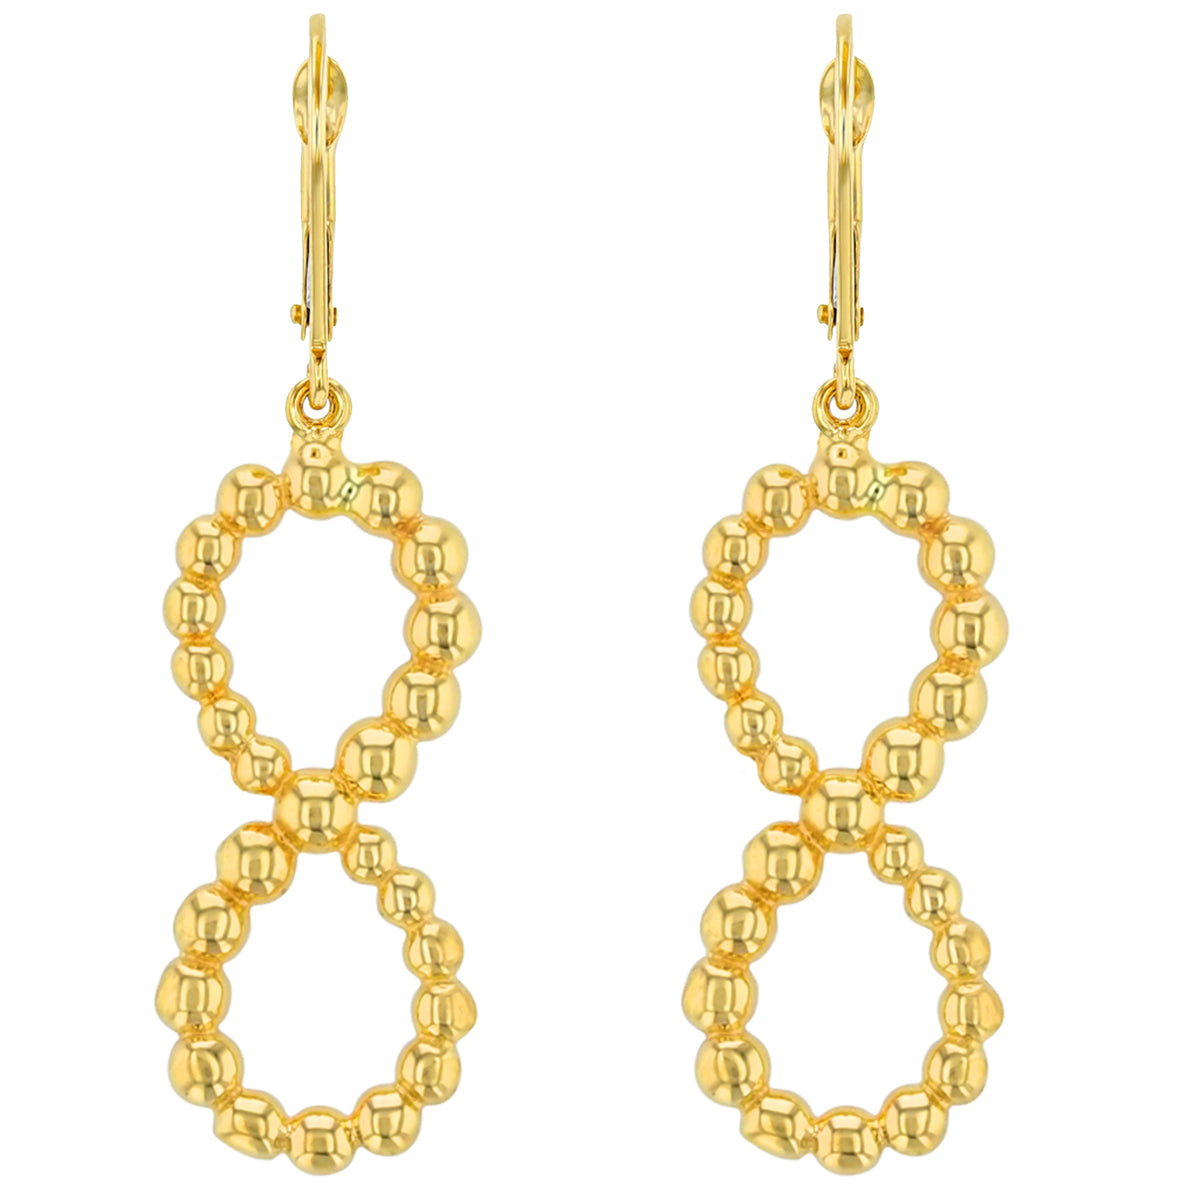 14k Yellow Gold Beaded Infinity Earrings with Leverback